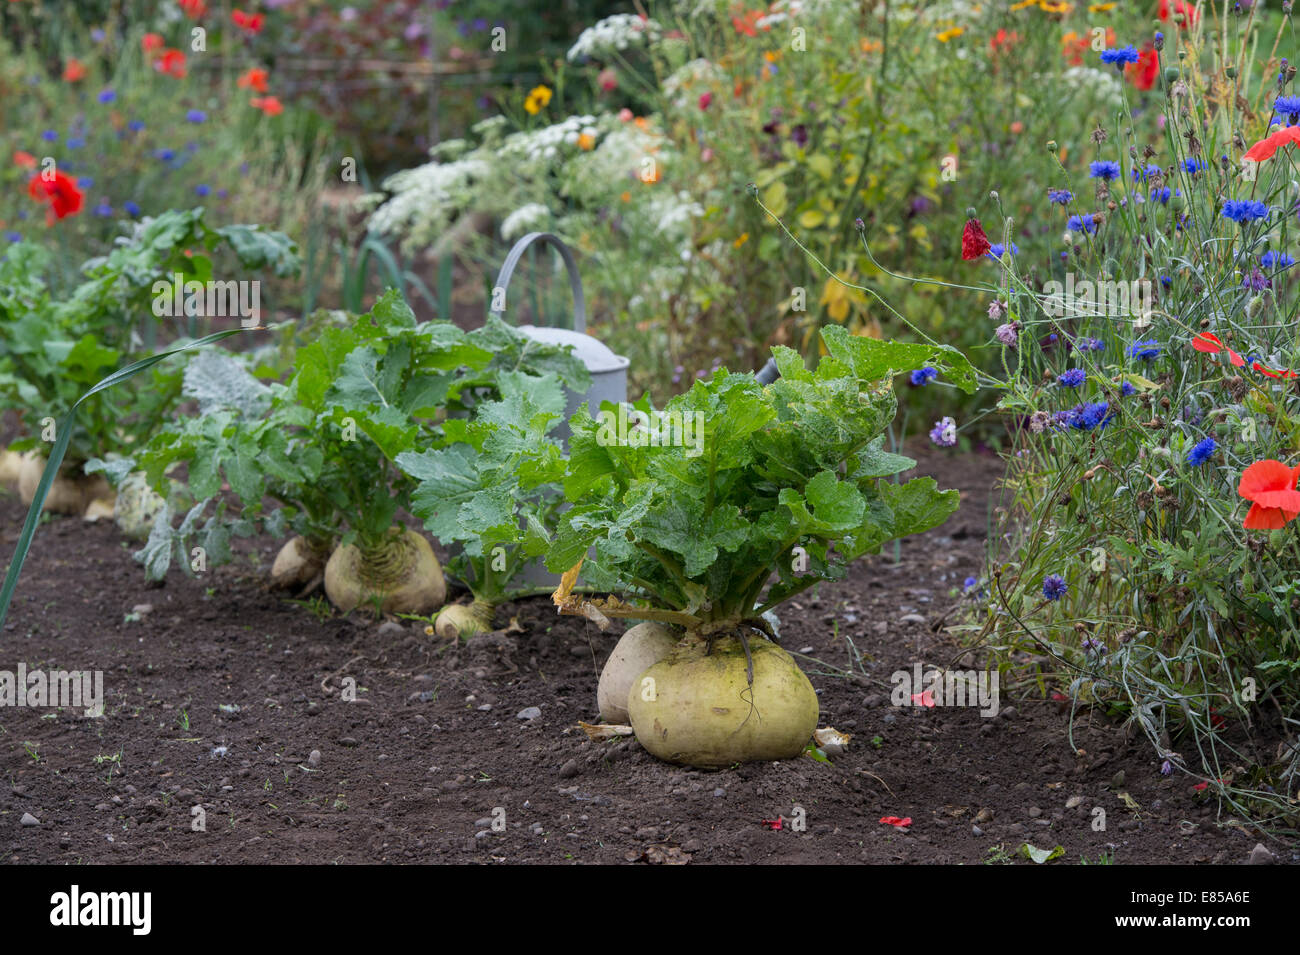 Brassica rapa. Turnips in a vegetable patch Stock Photo